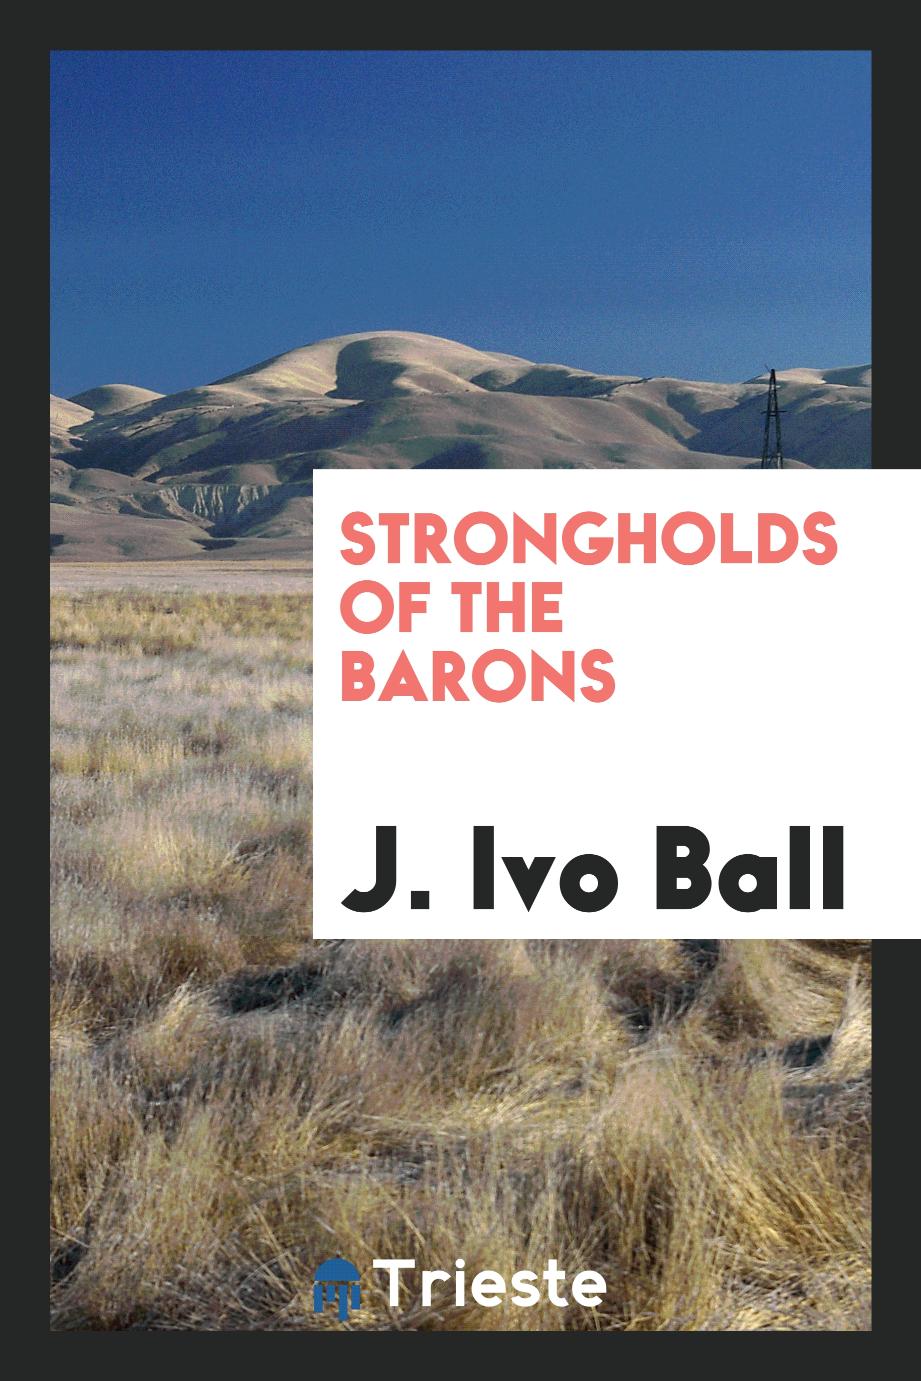 Strongholds of the Barons